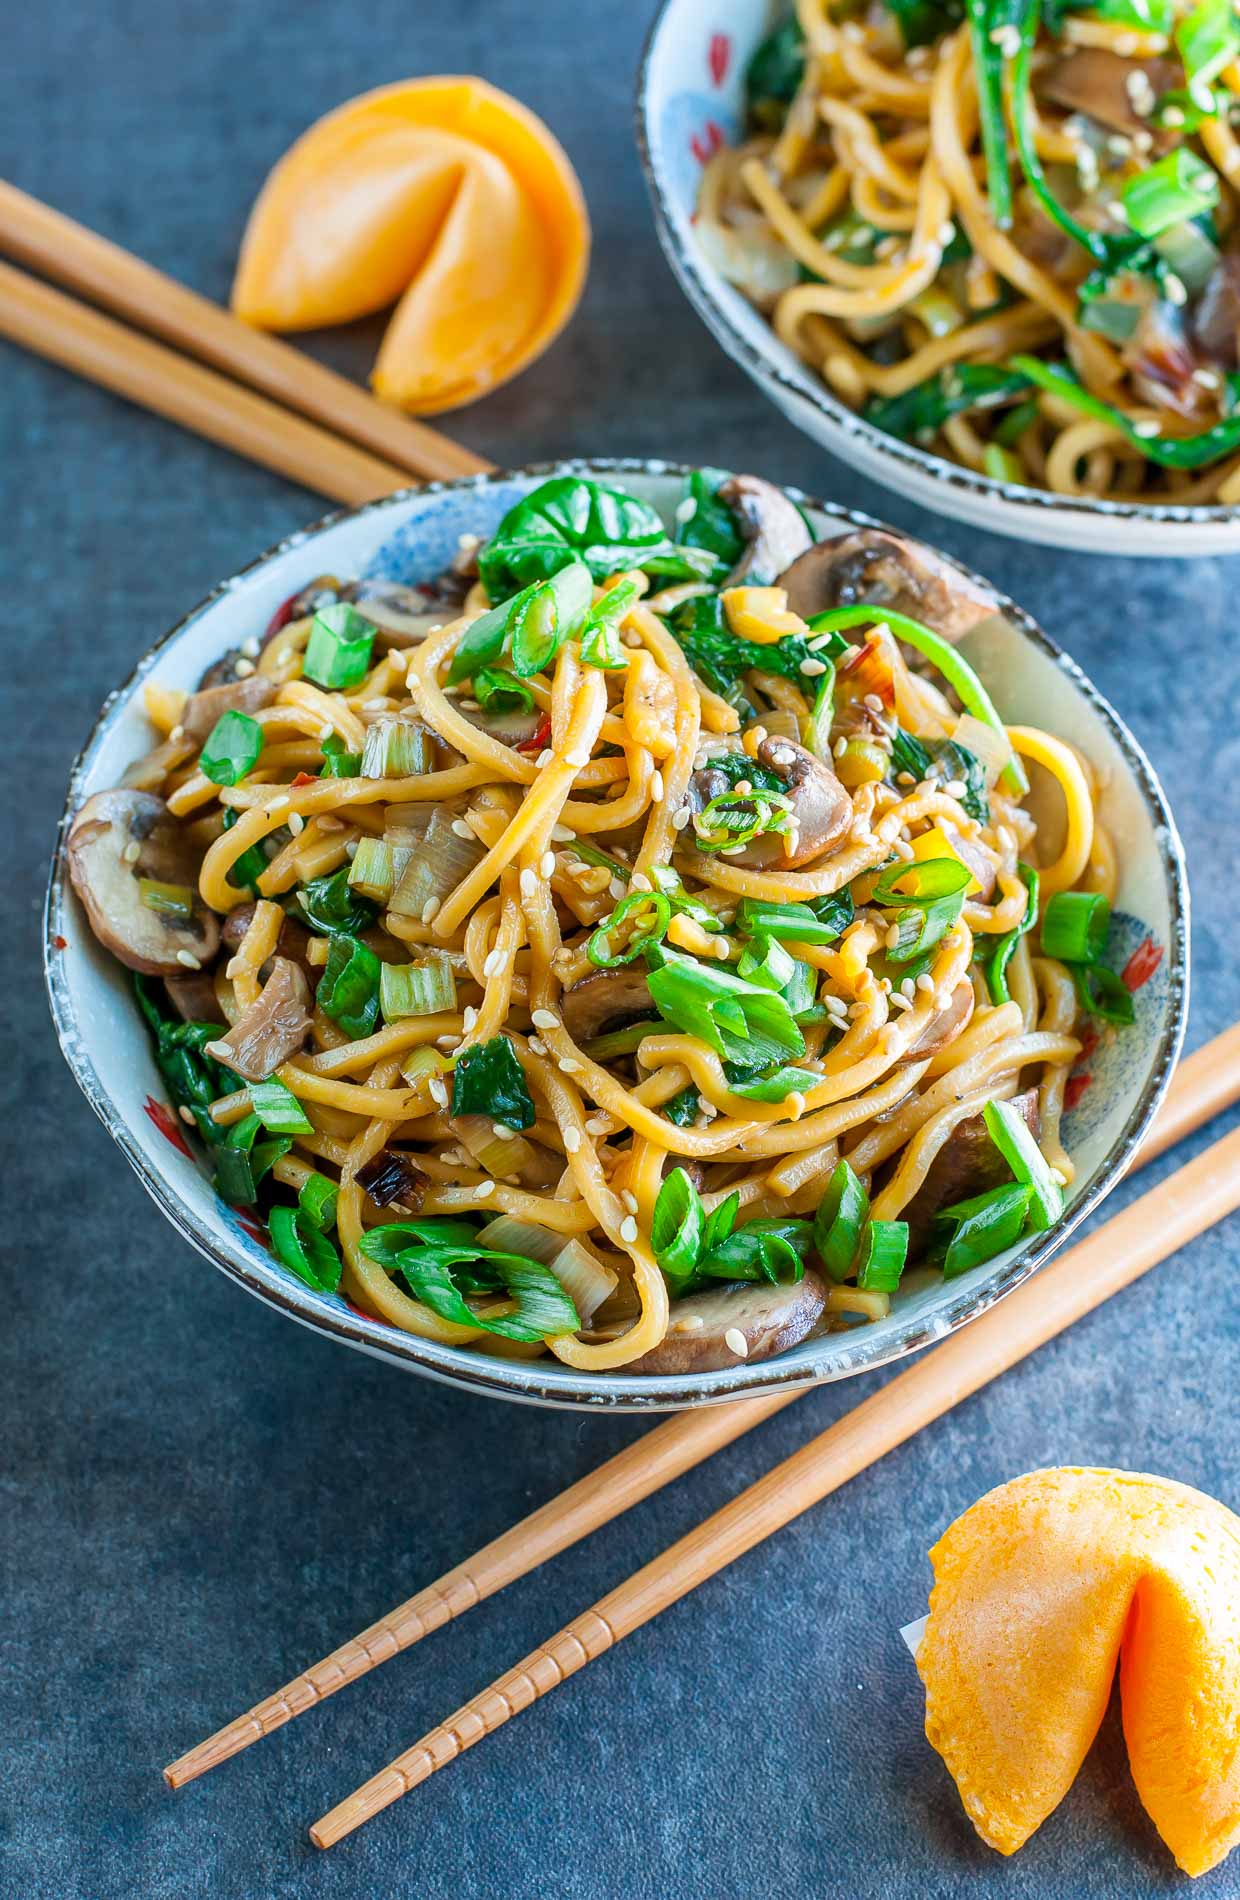 Take-out inspired Spinach Mushroom Leek Noodle Bowls tossed in the most amazing homemade sesame sauce. Pair with your favorite protein, or enjoy all on it's own as a tasty vegan/vegetarian main or side!